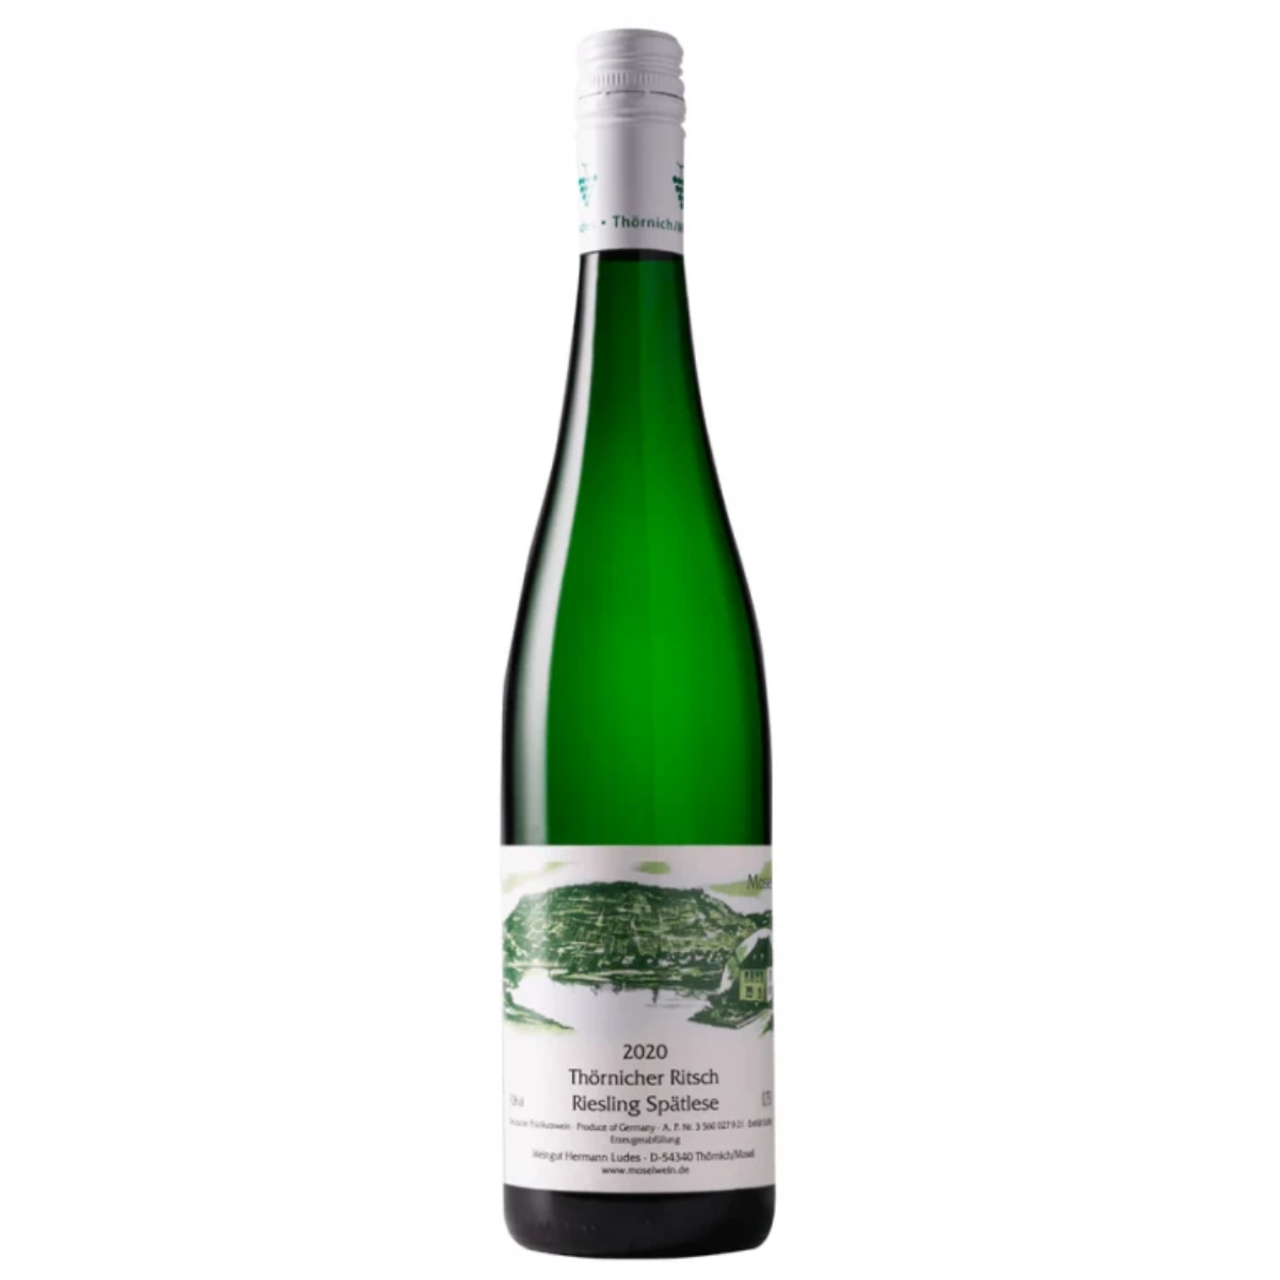 Hermann Ludes, Thornicher Ritsch Riesling Mosel Reverie Vinous - Spatlese 2020